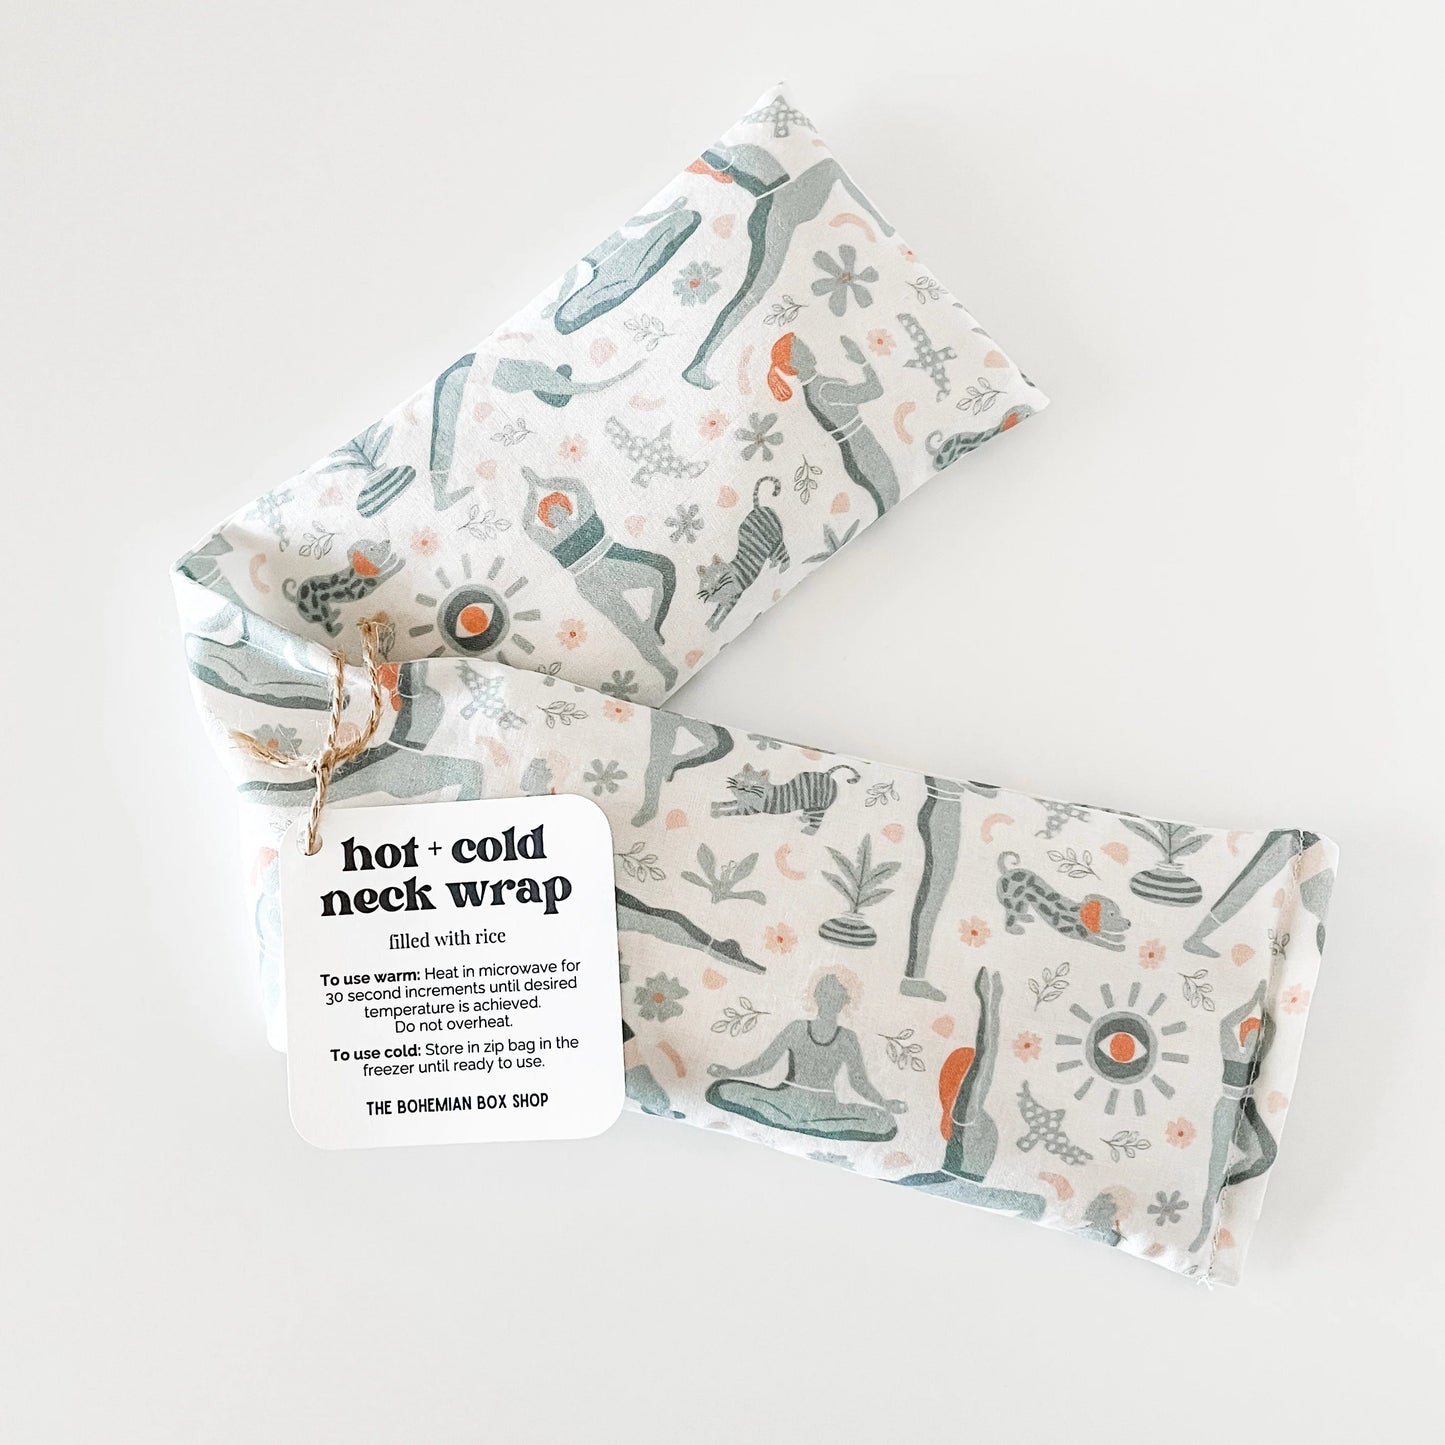 Serene & Mindful Yoga Hot and Cold Neck Wrap - Microwaveable Rice Packs